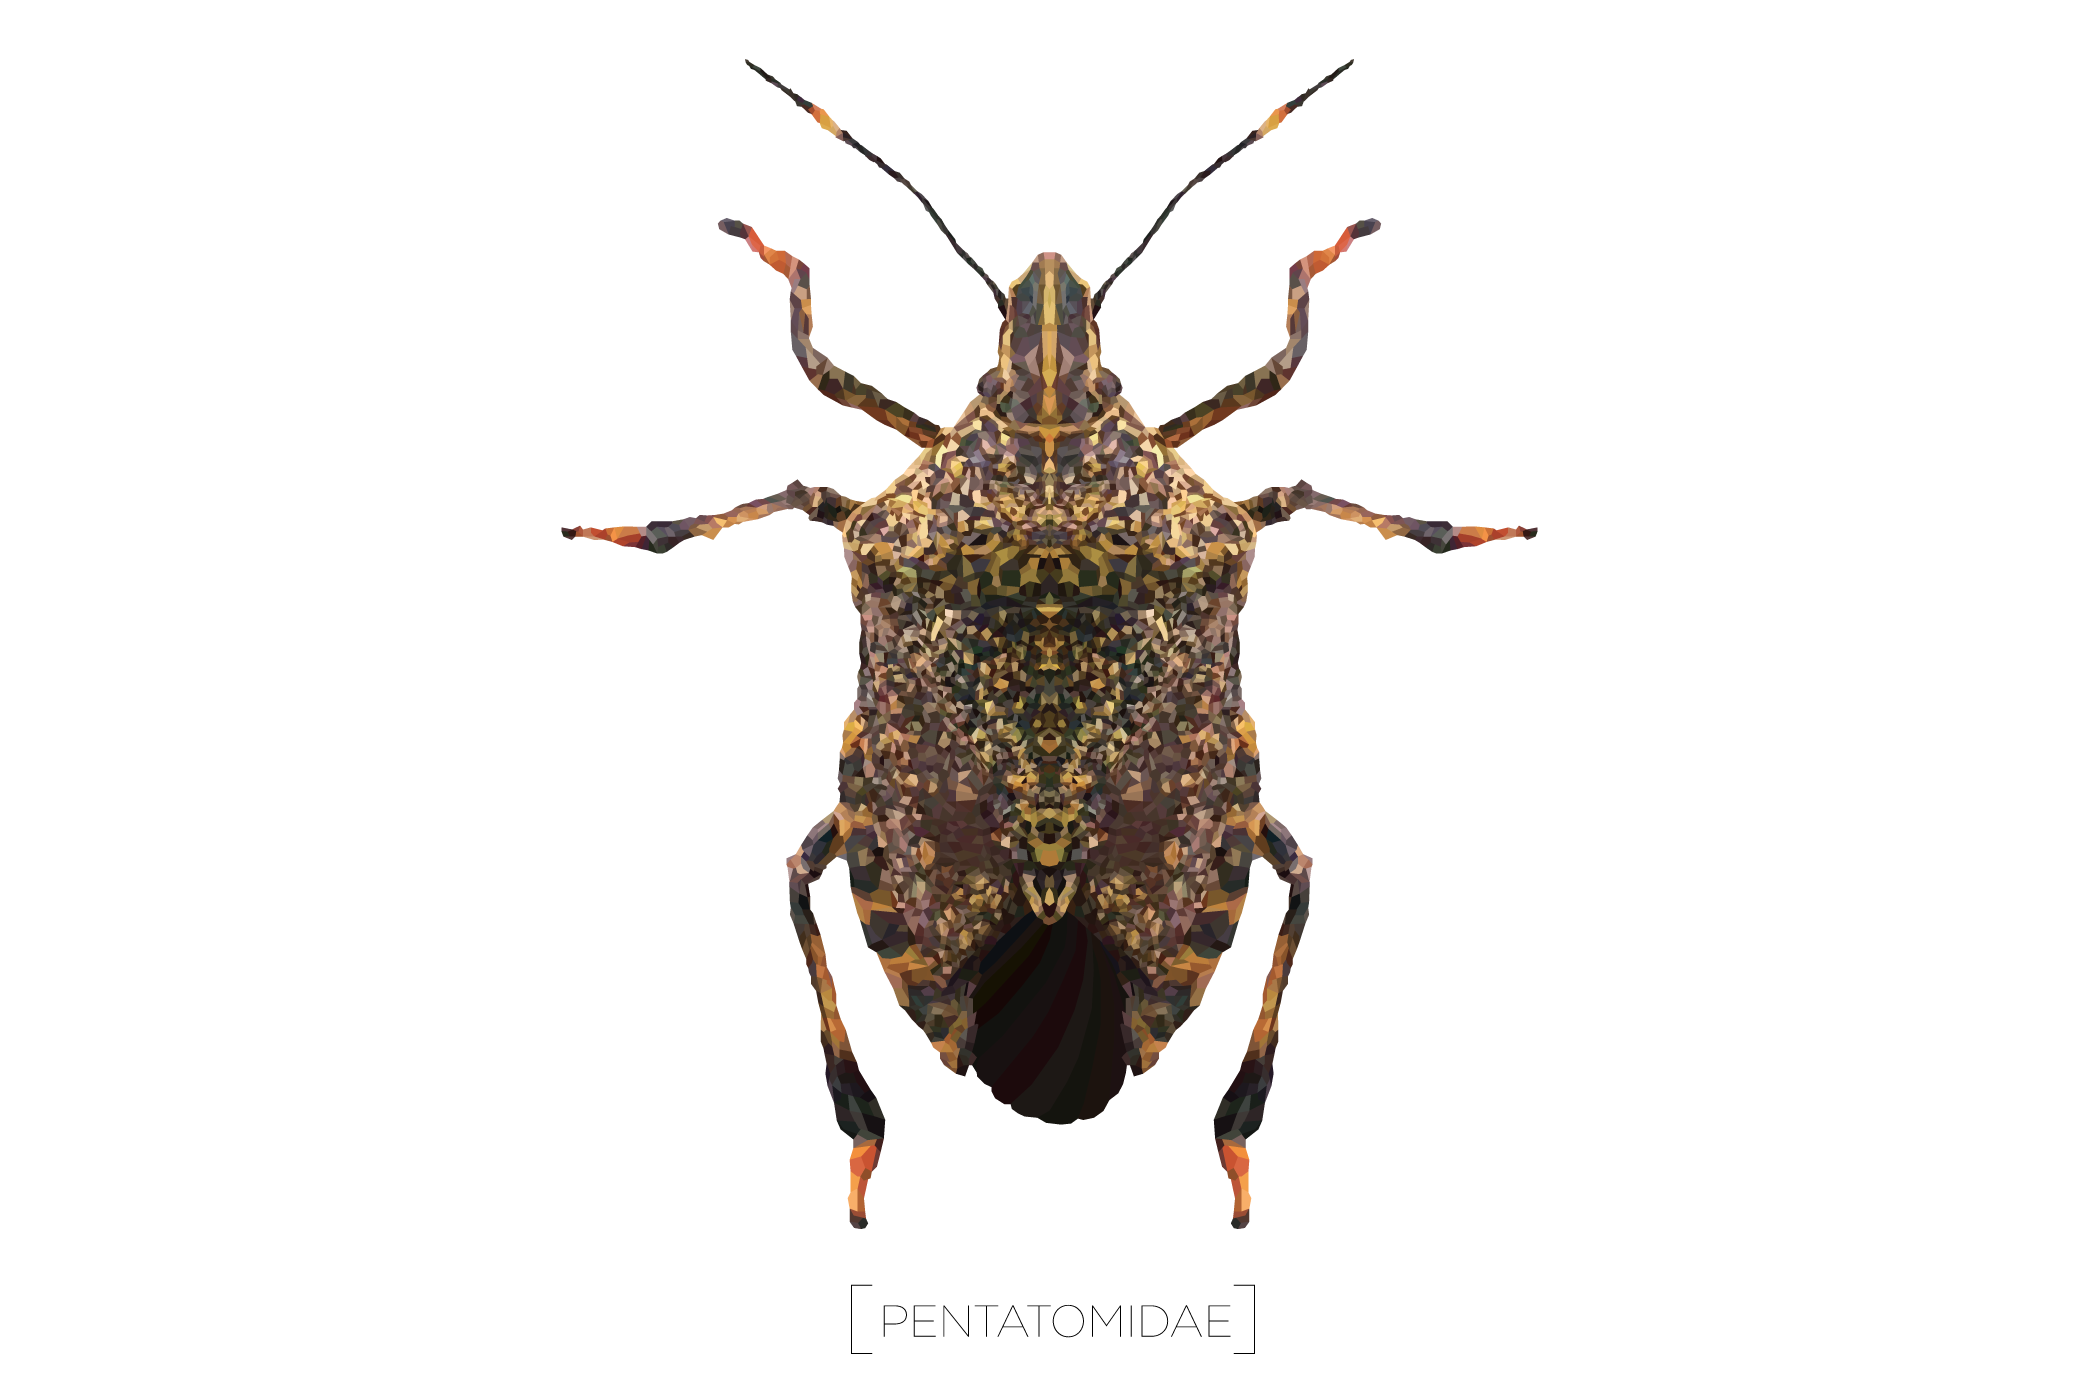 insects clipart stink bug